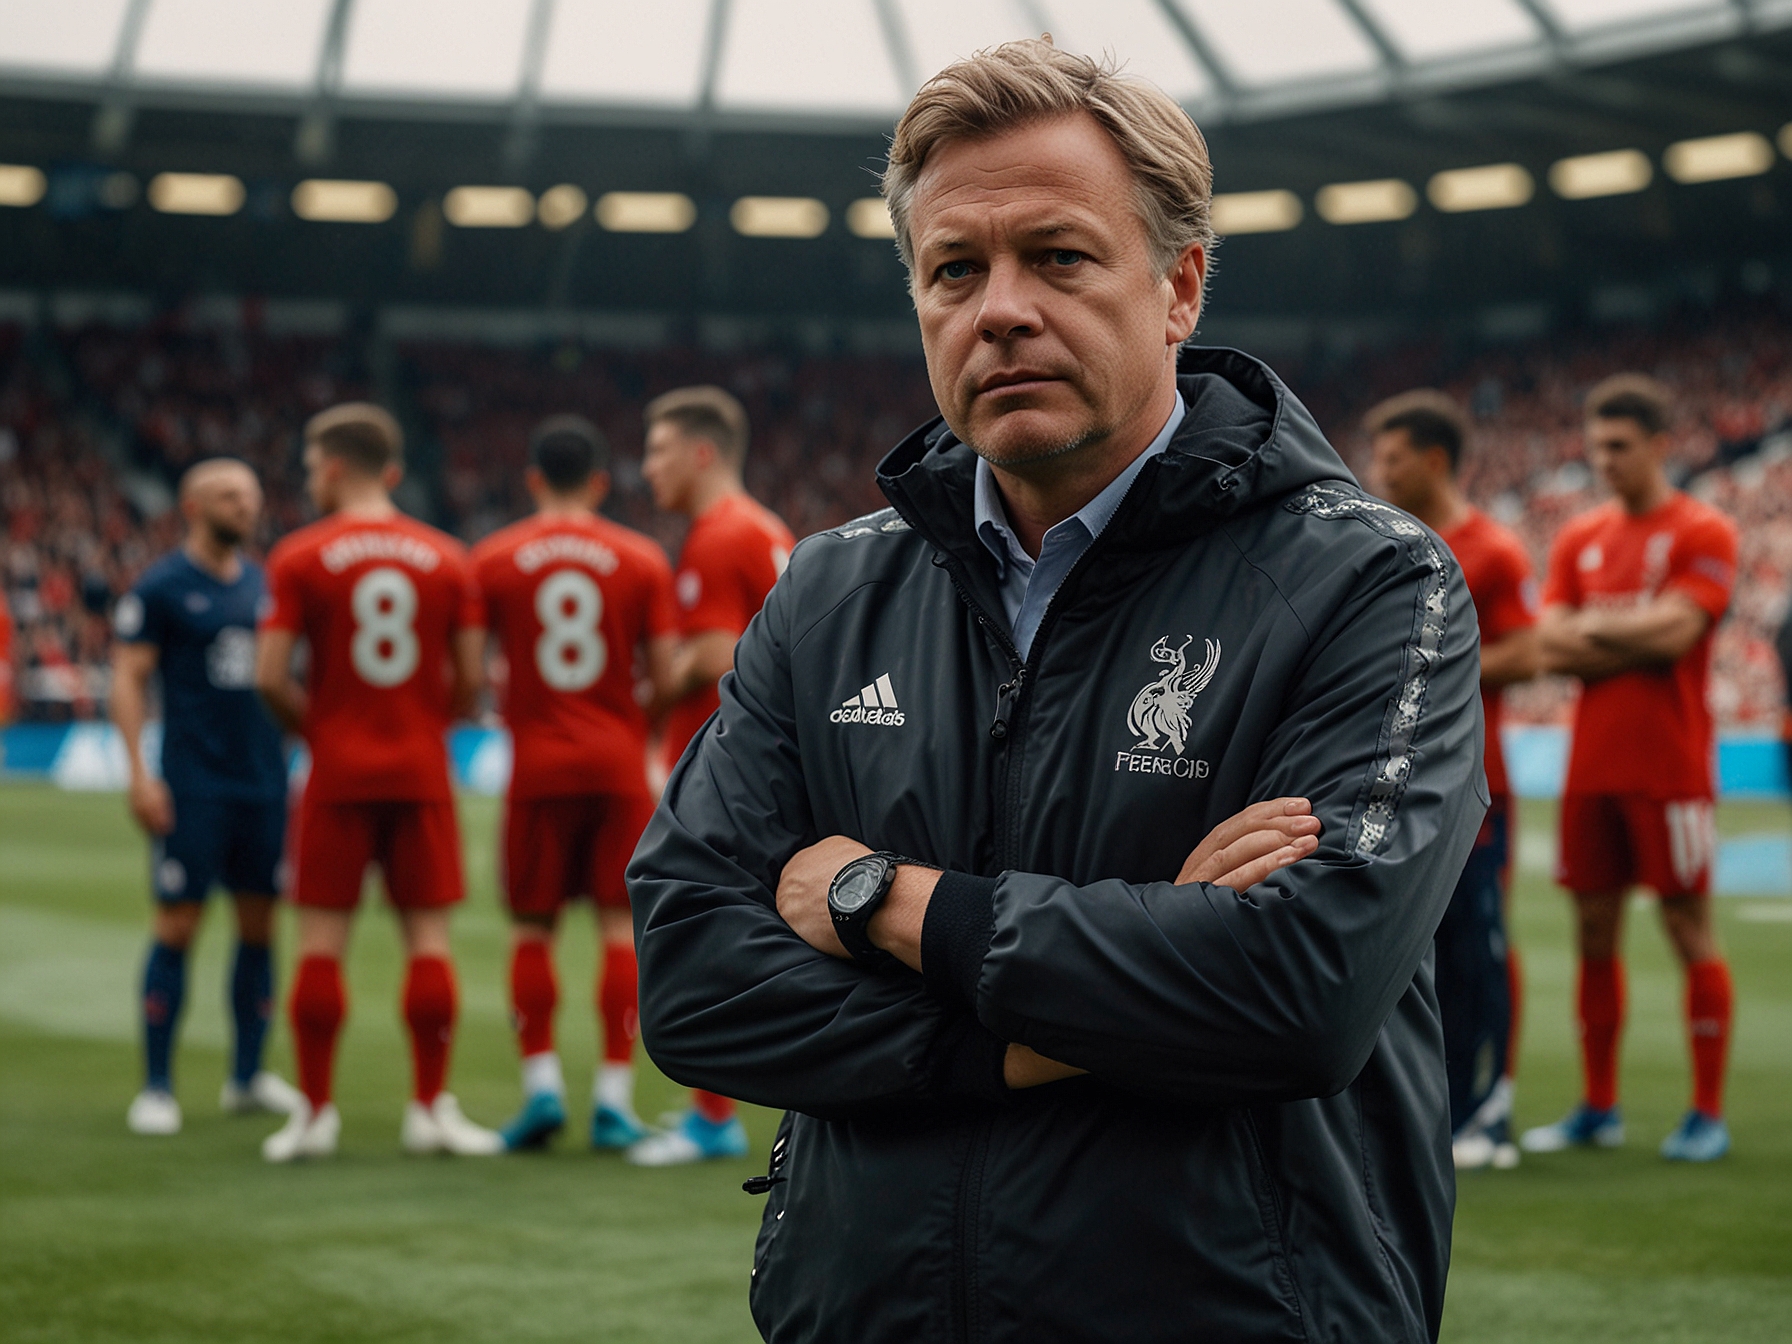 Manager Arne Slot stands confidently on the sidelines, strategizing as his Feyenoord players showcase their skills, fully aware of the critical Liverpool scouts in attendance at Euro 2024.